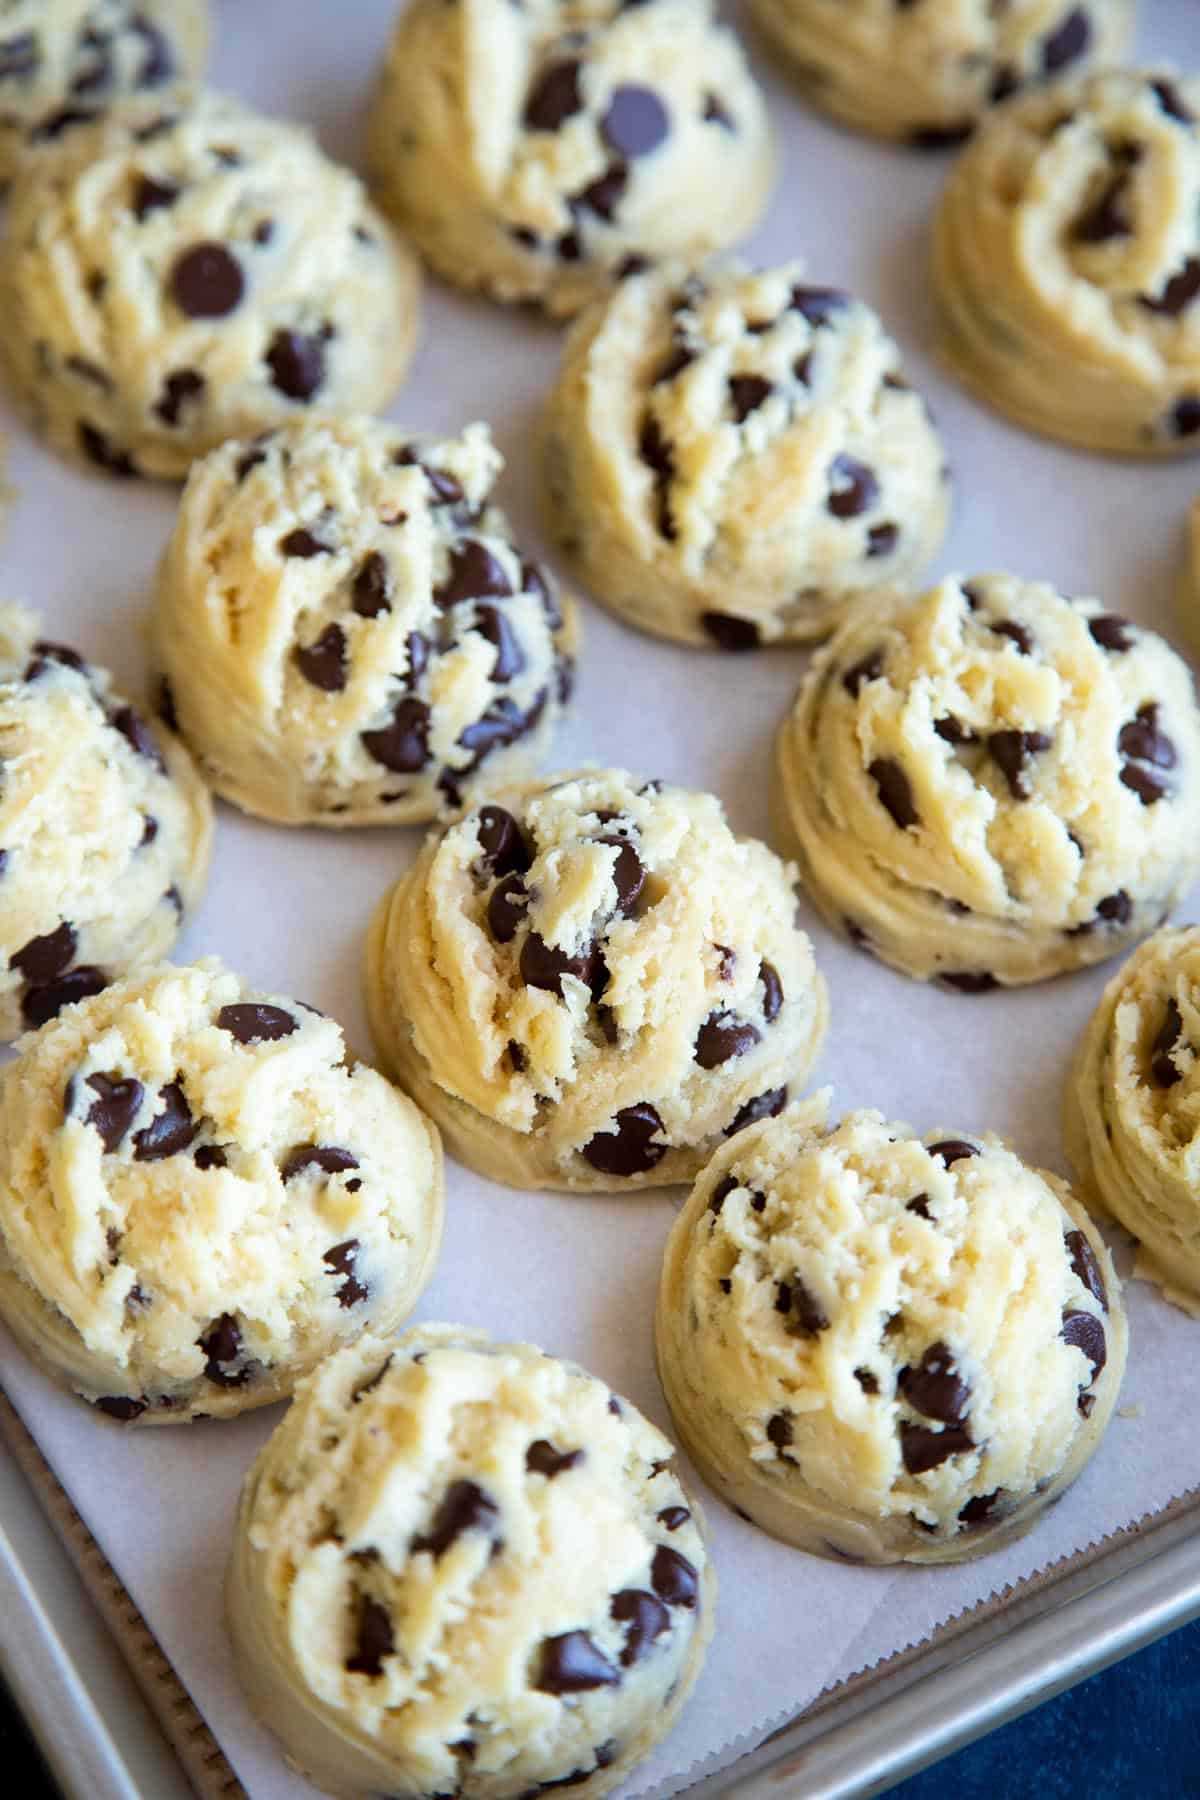 Chocolate chip cookie dough portioned into balls on a baking sheet.